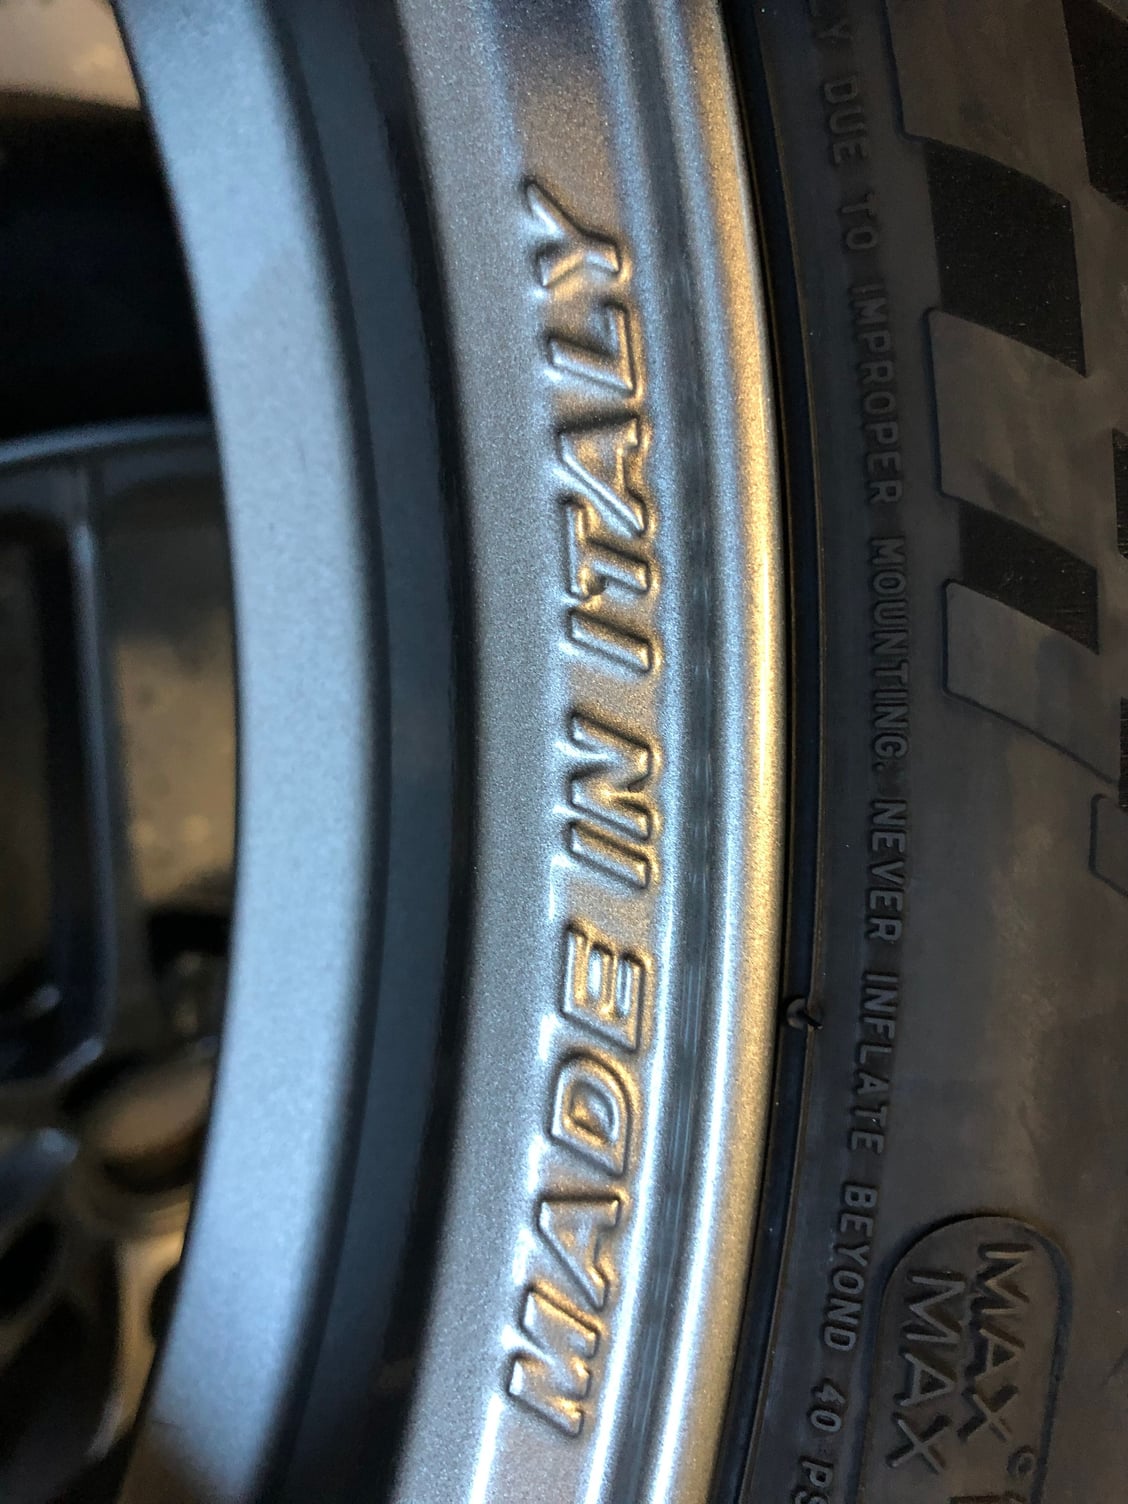 Wheels and Tires/Axles - OZ 20" Leggier Wheels w/ Michelin Sport Cup 2 - Used - 2013 to 2019 Porsche 911 - Tampa, FL 34655, United States